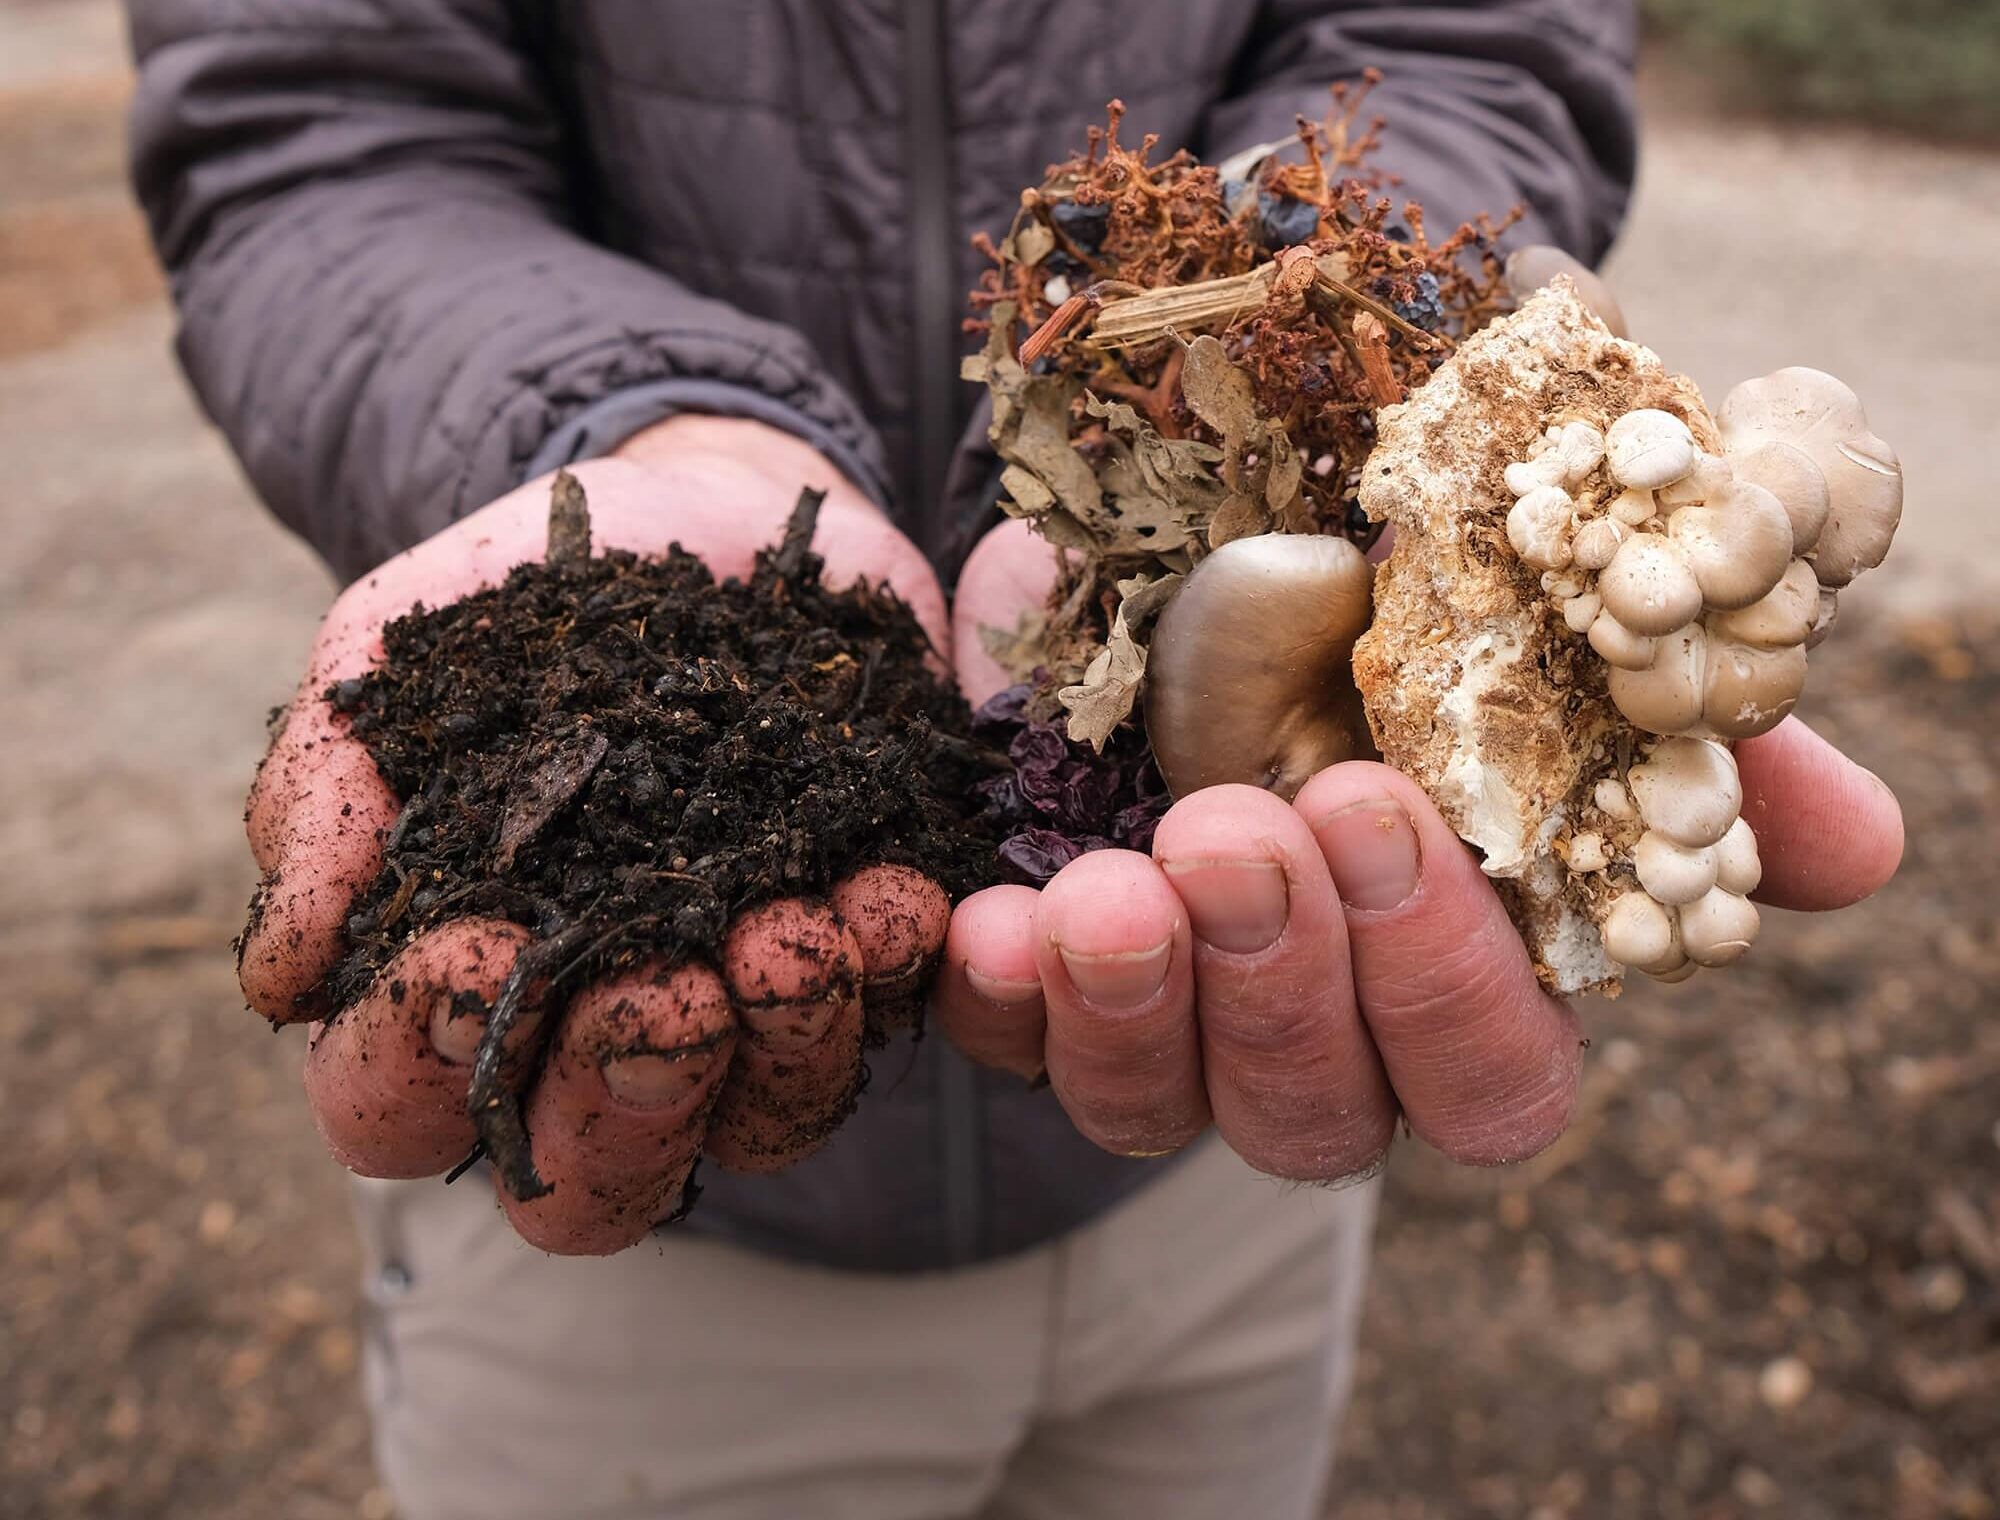 alt="Two hands holding rich, earth toned compost ingredients including grape stems, mushrooms, grapeskins and other materials."